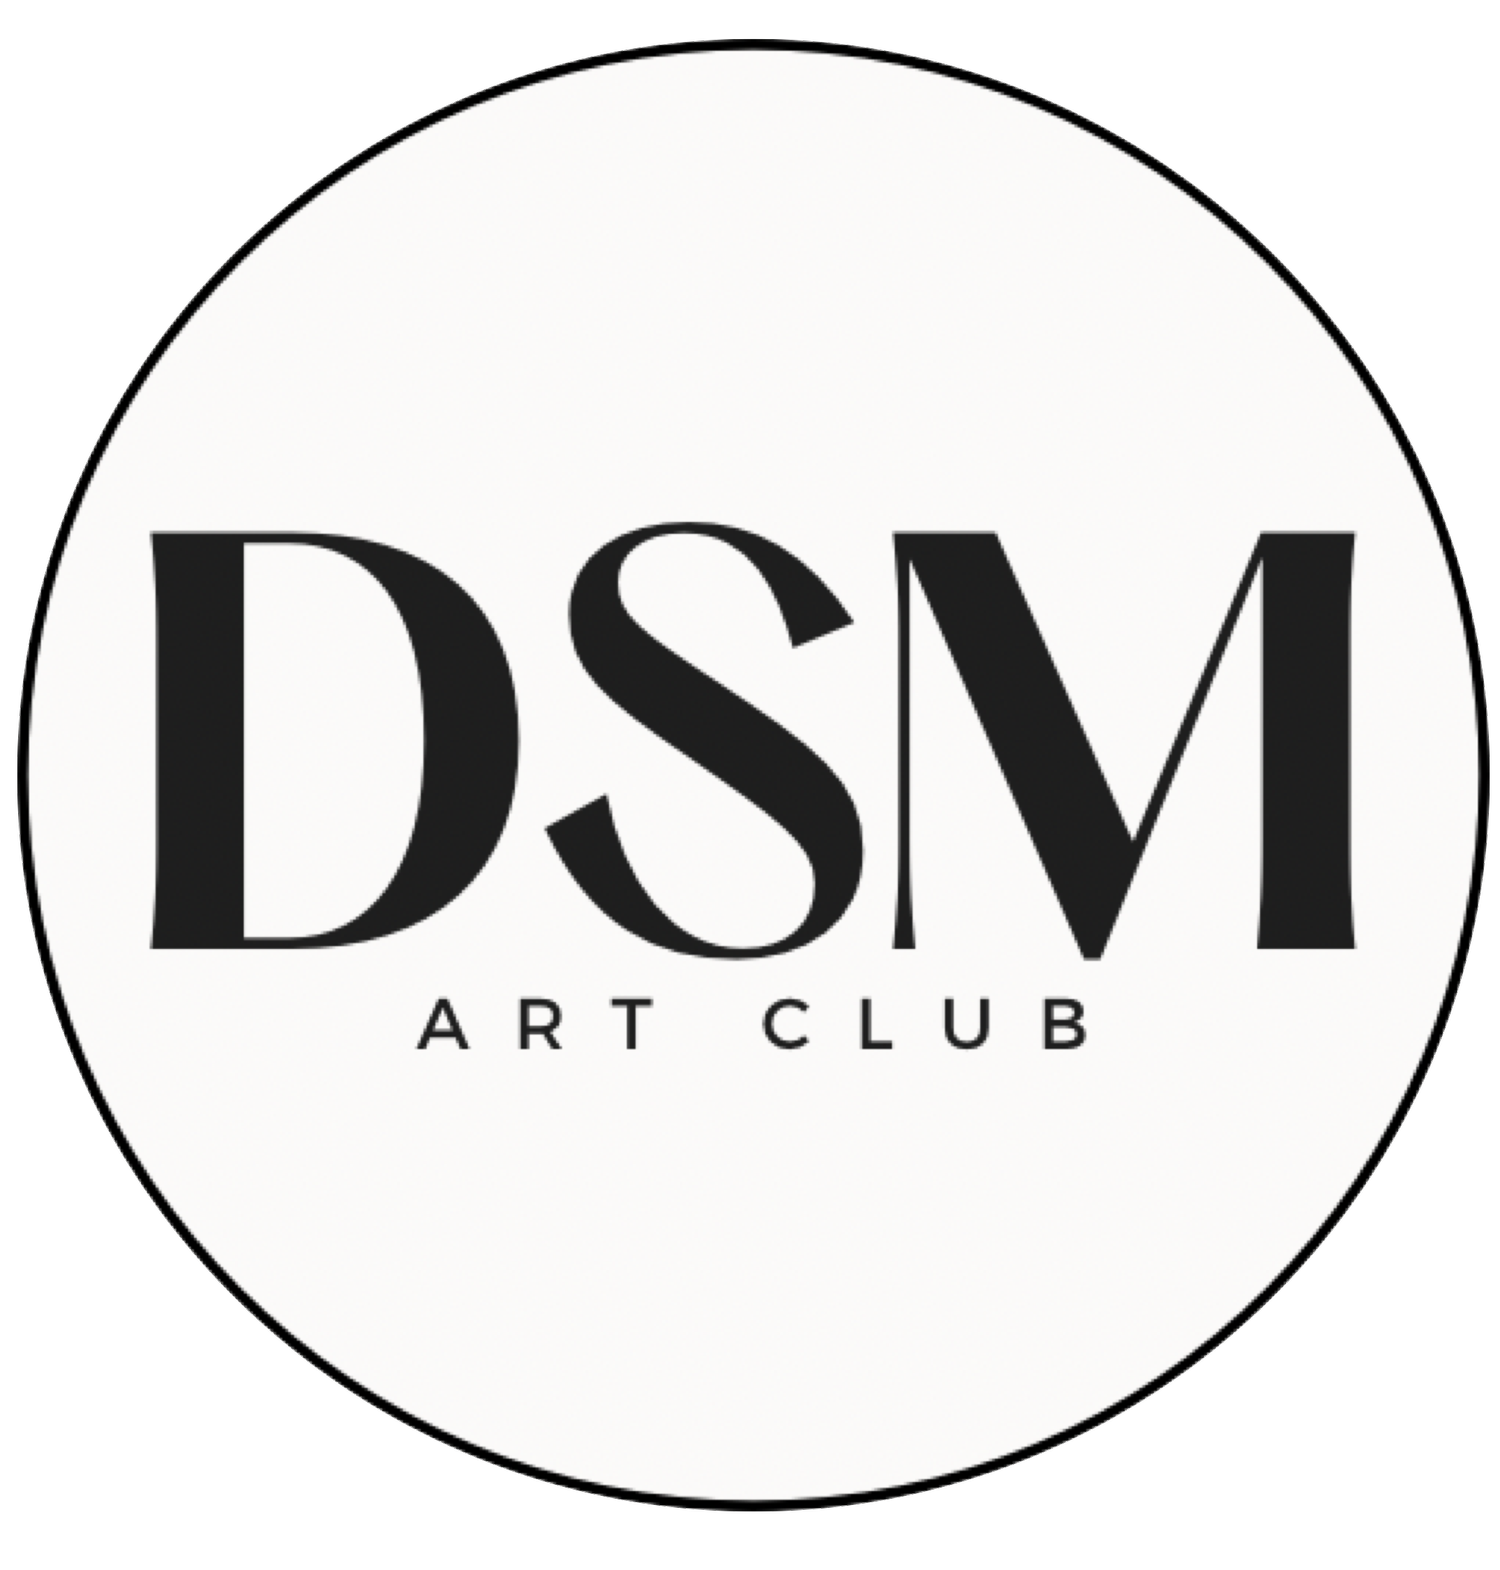 DSM Art Club - Art classes and summer camps for kids, teens and adults in Des Moines